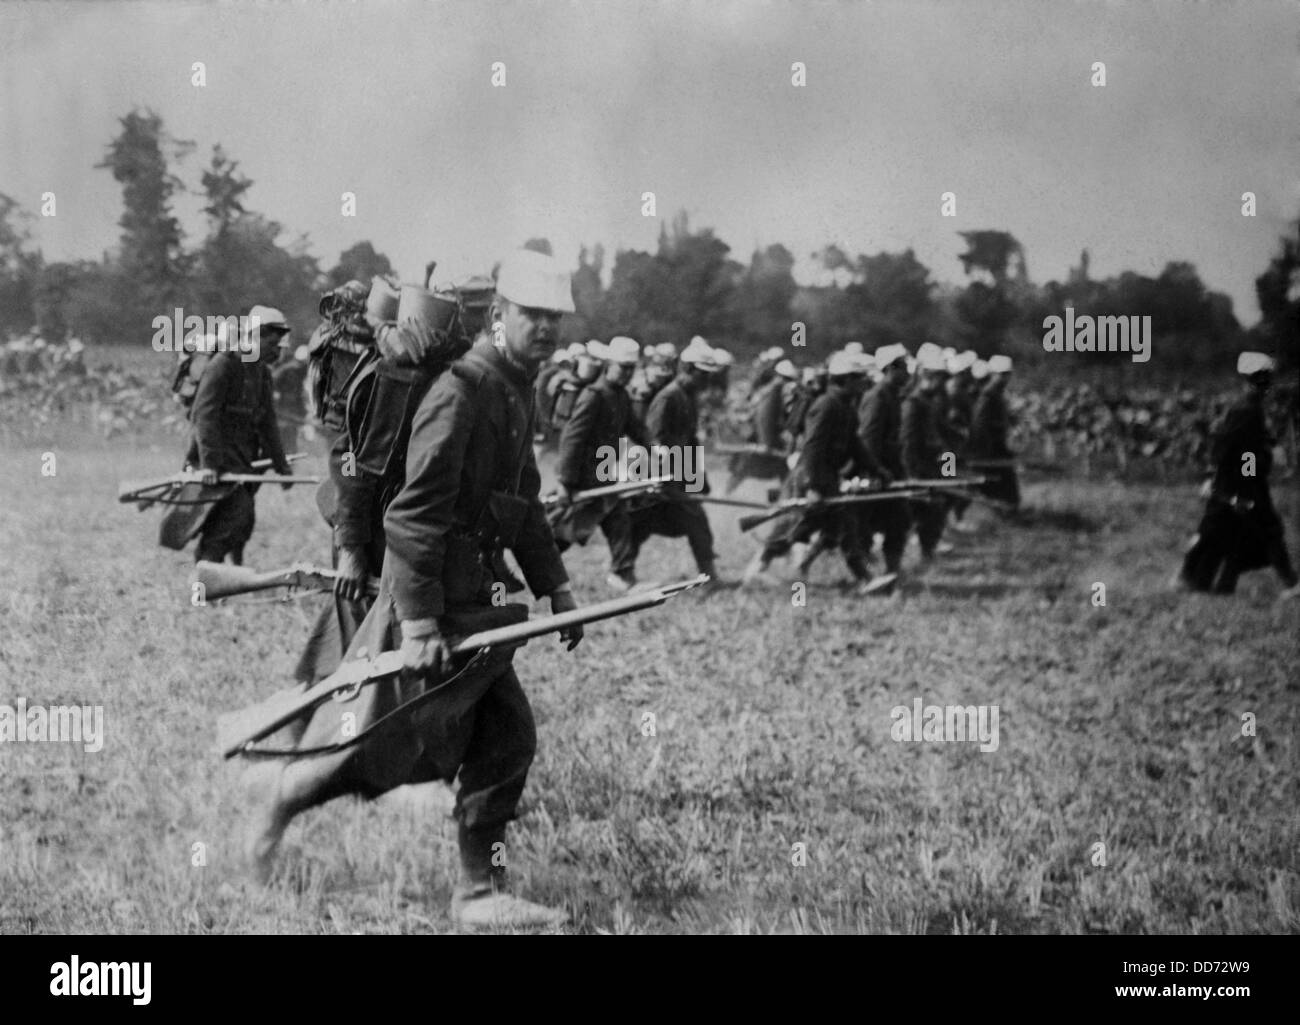 World War 1. Serbian troops in the field. Serbian forces resisted Austria's 1914 invasion, then retreated to rest and resupply. Stock Photo